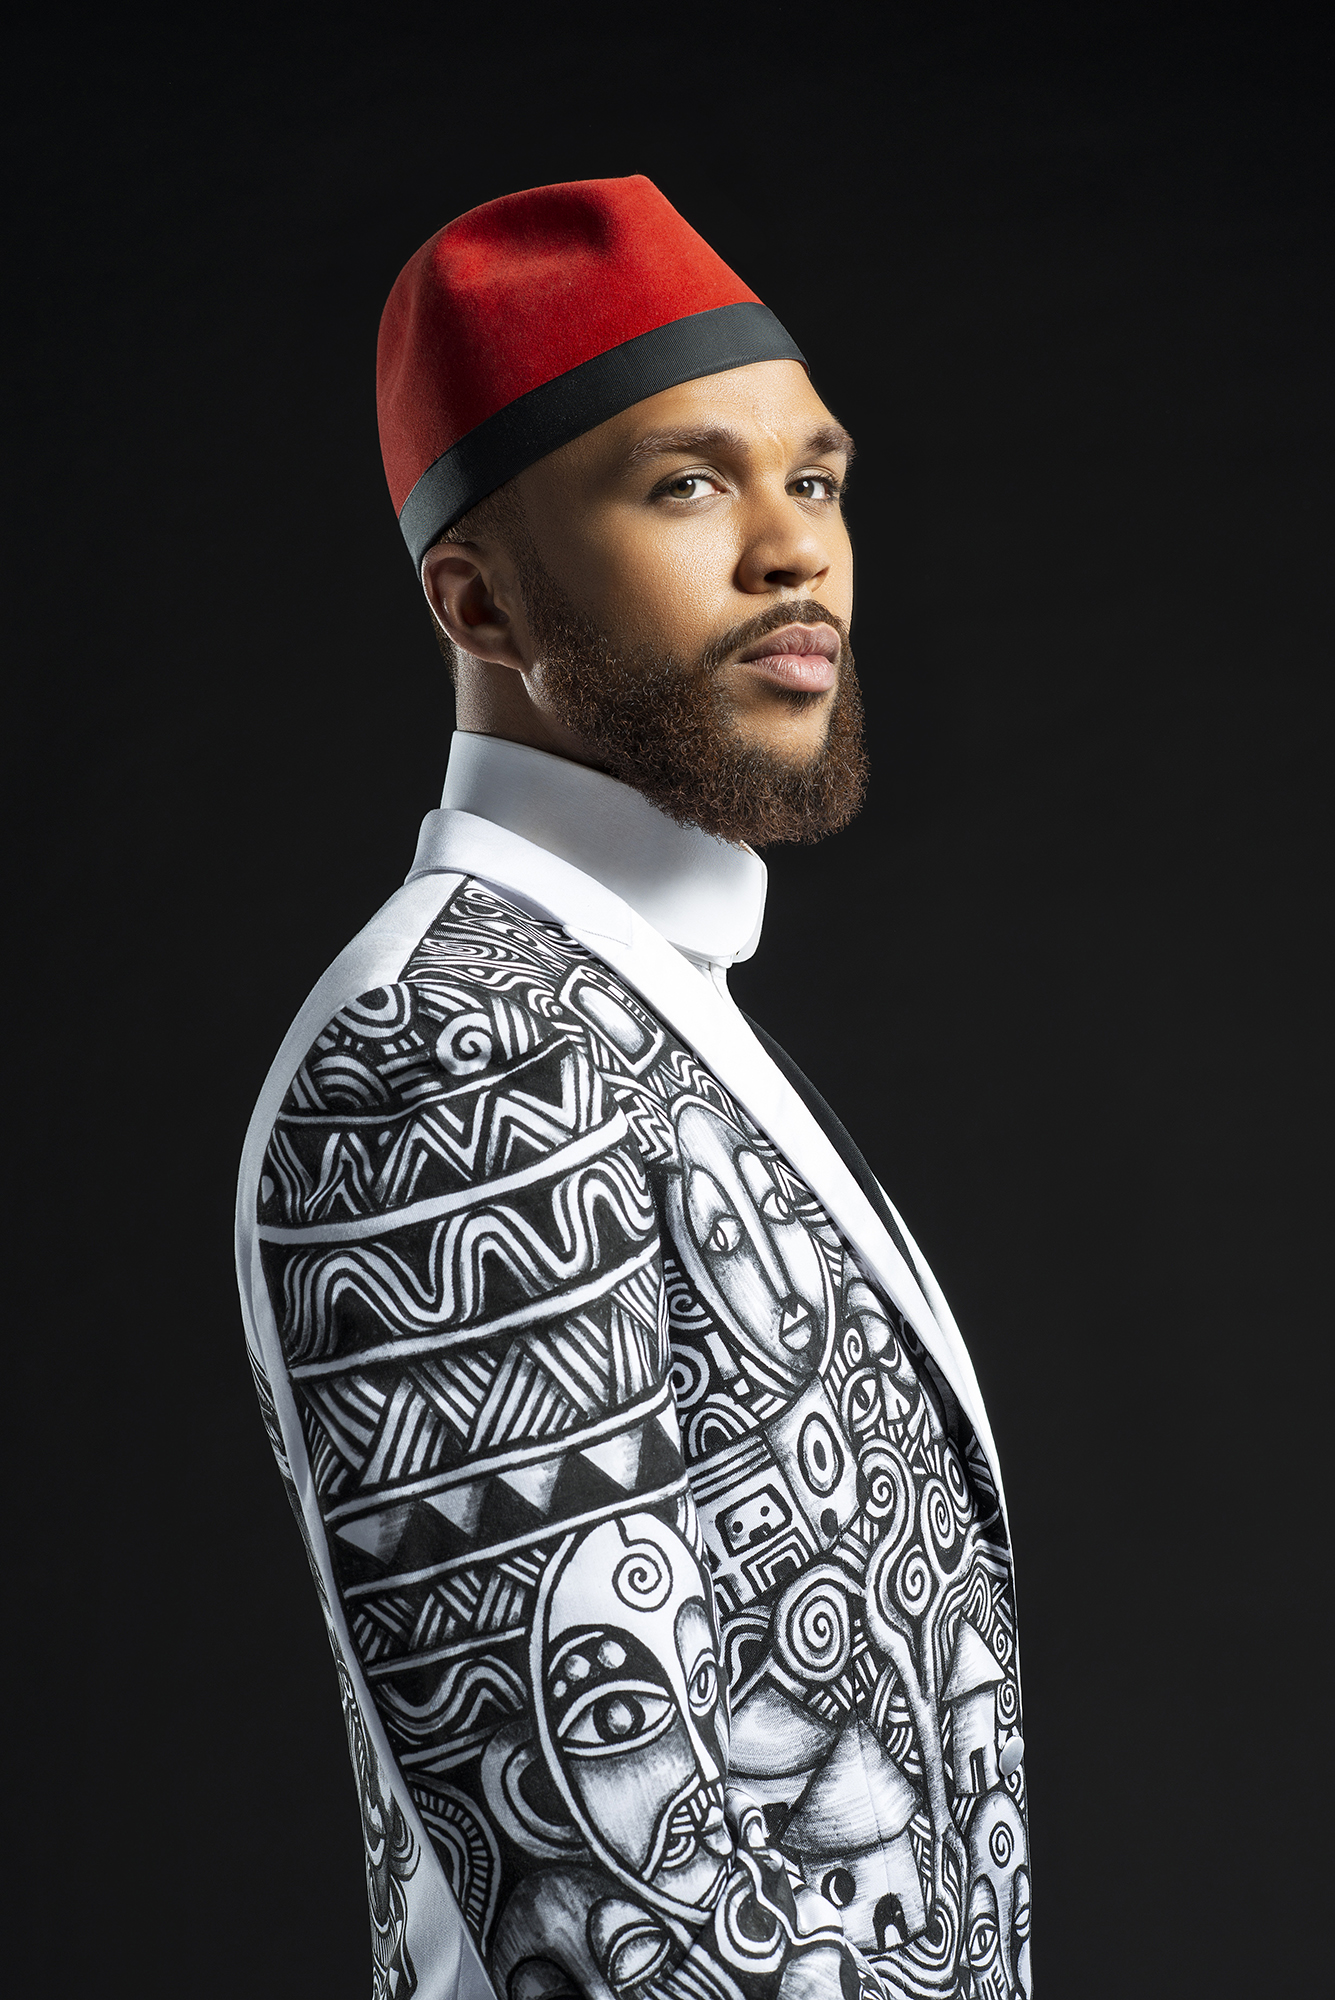 Jidenna  photographed by Aviva Klein for Epic Records 2022